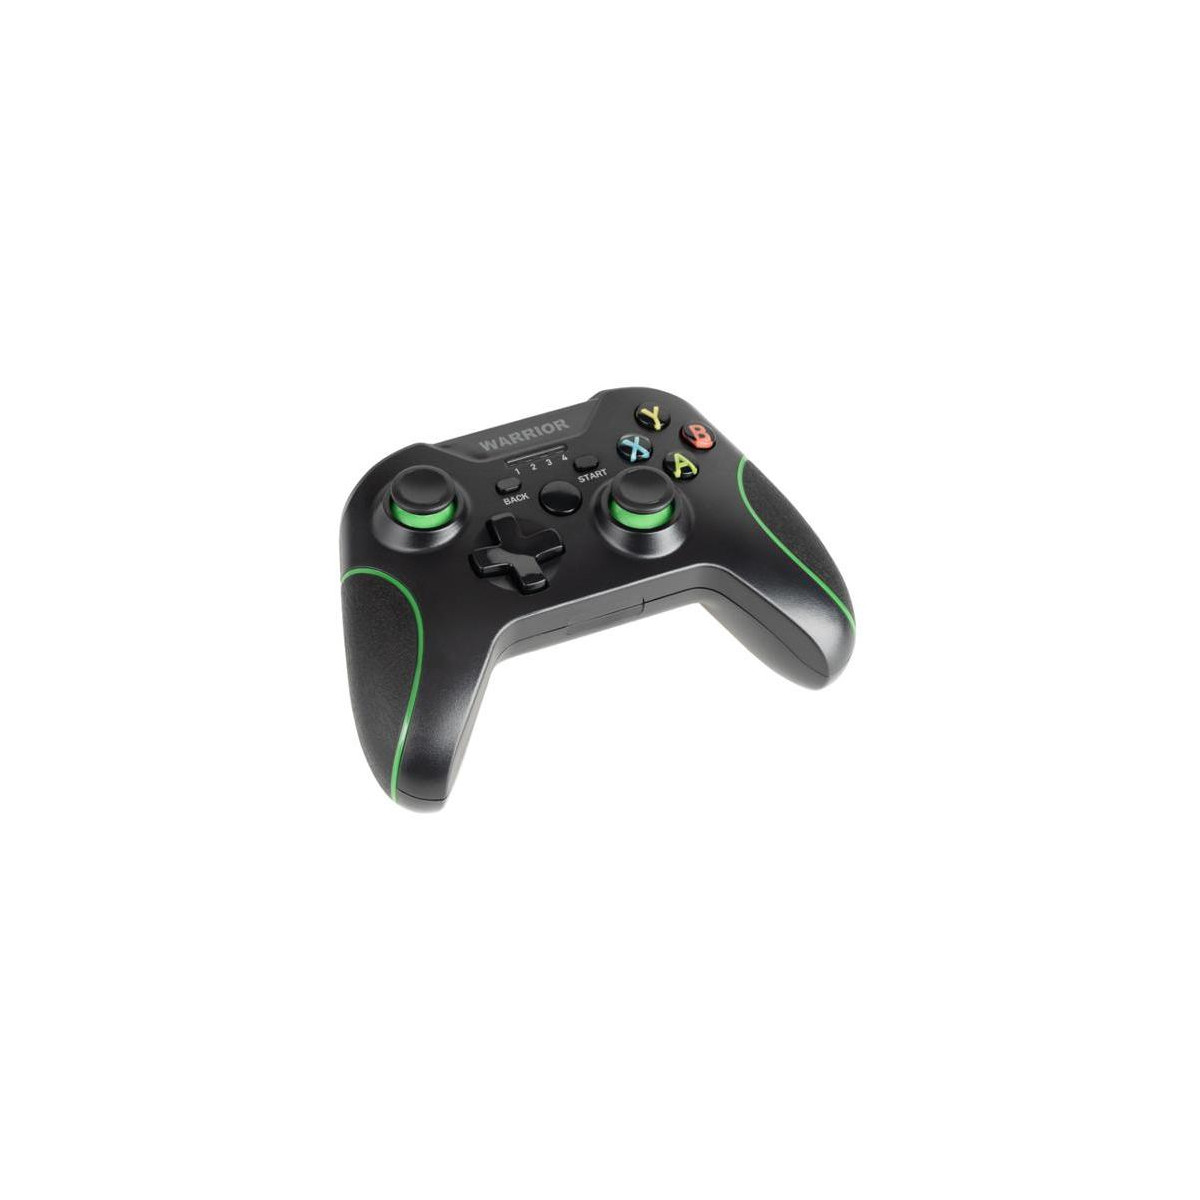 More about Gamepad KRUGER & MATZ KM0770 pro XBOX ONE / PC